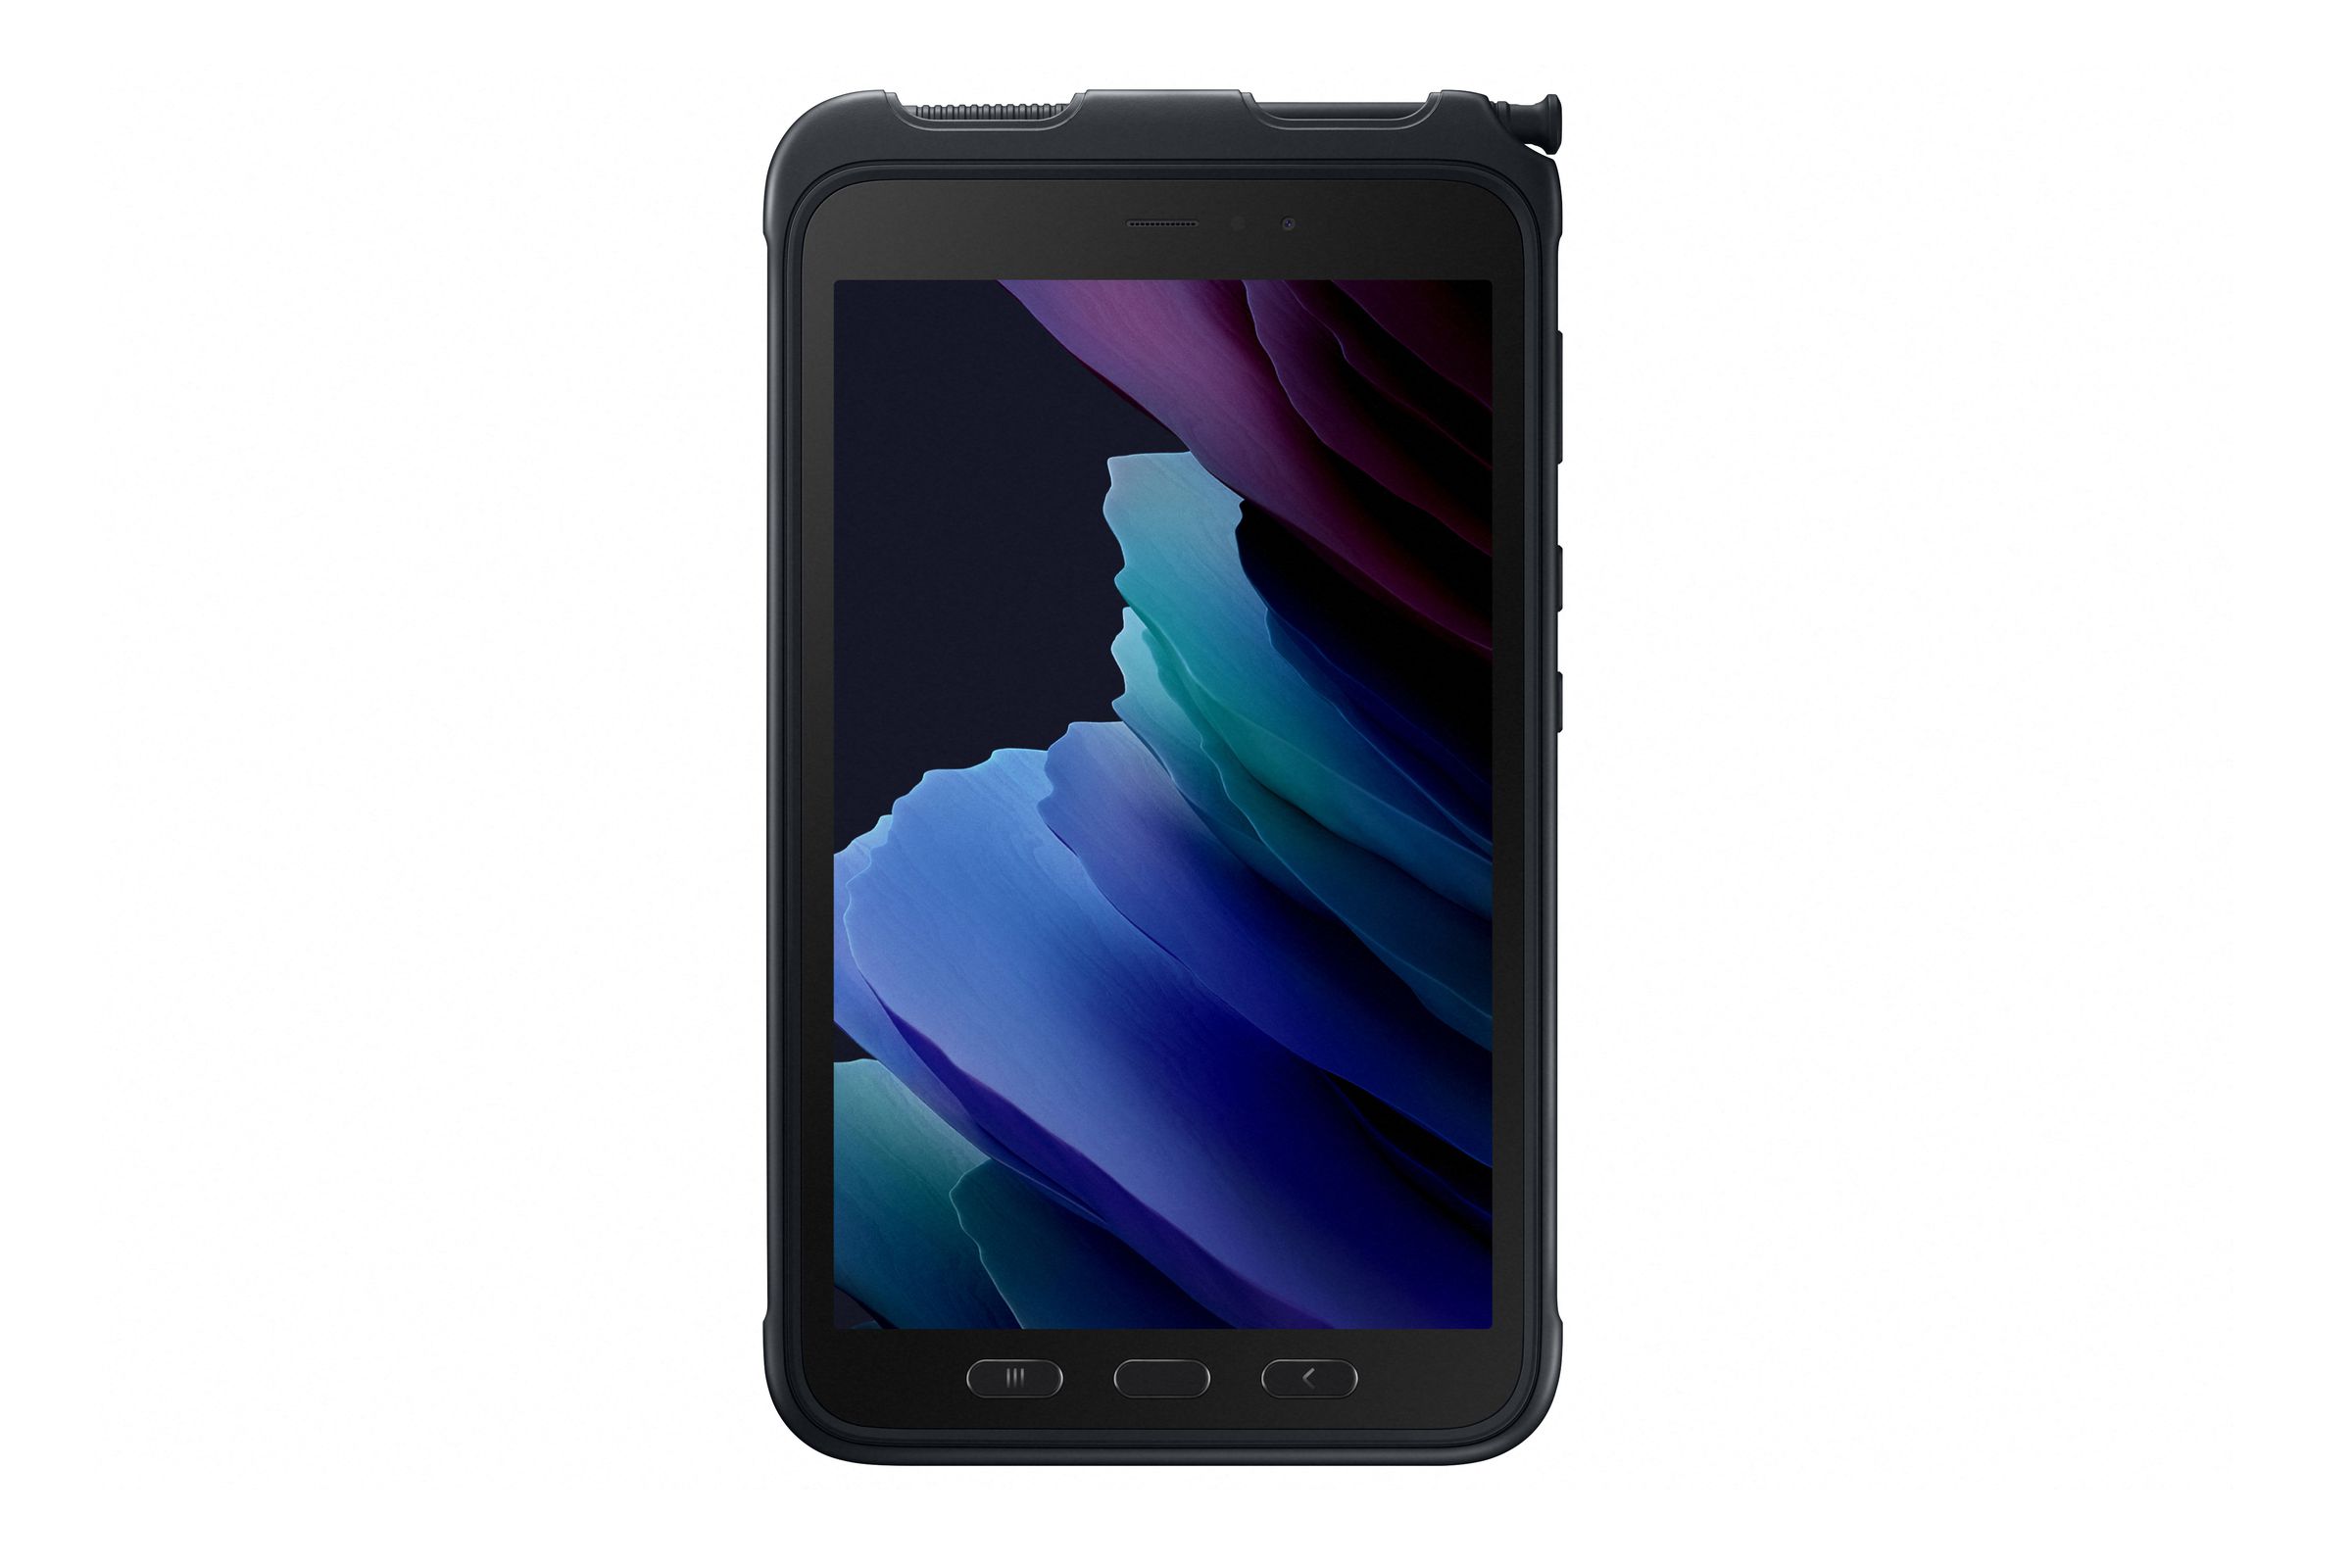 The Tab Active 3 is IP68 rated and, with the included case, can withstand a 1.5 meter drop.